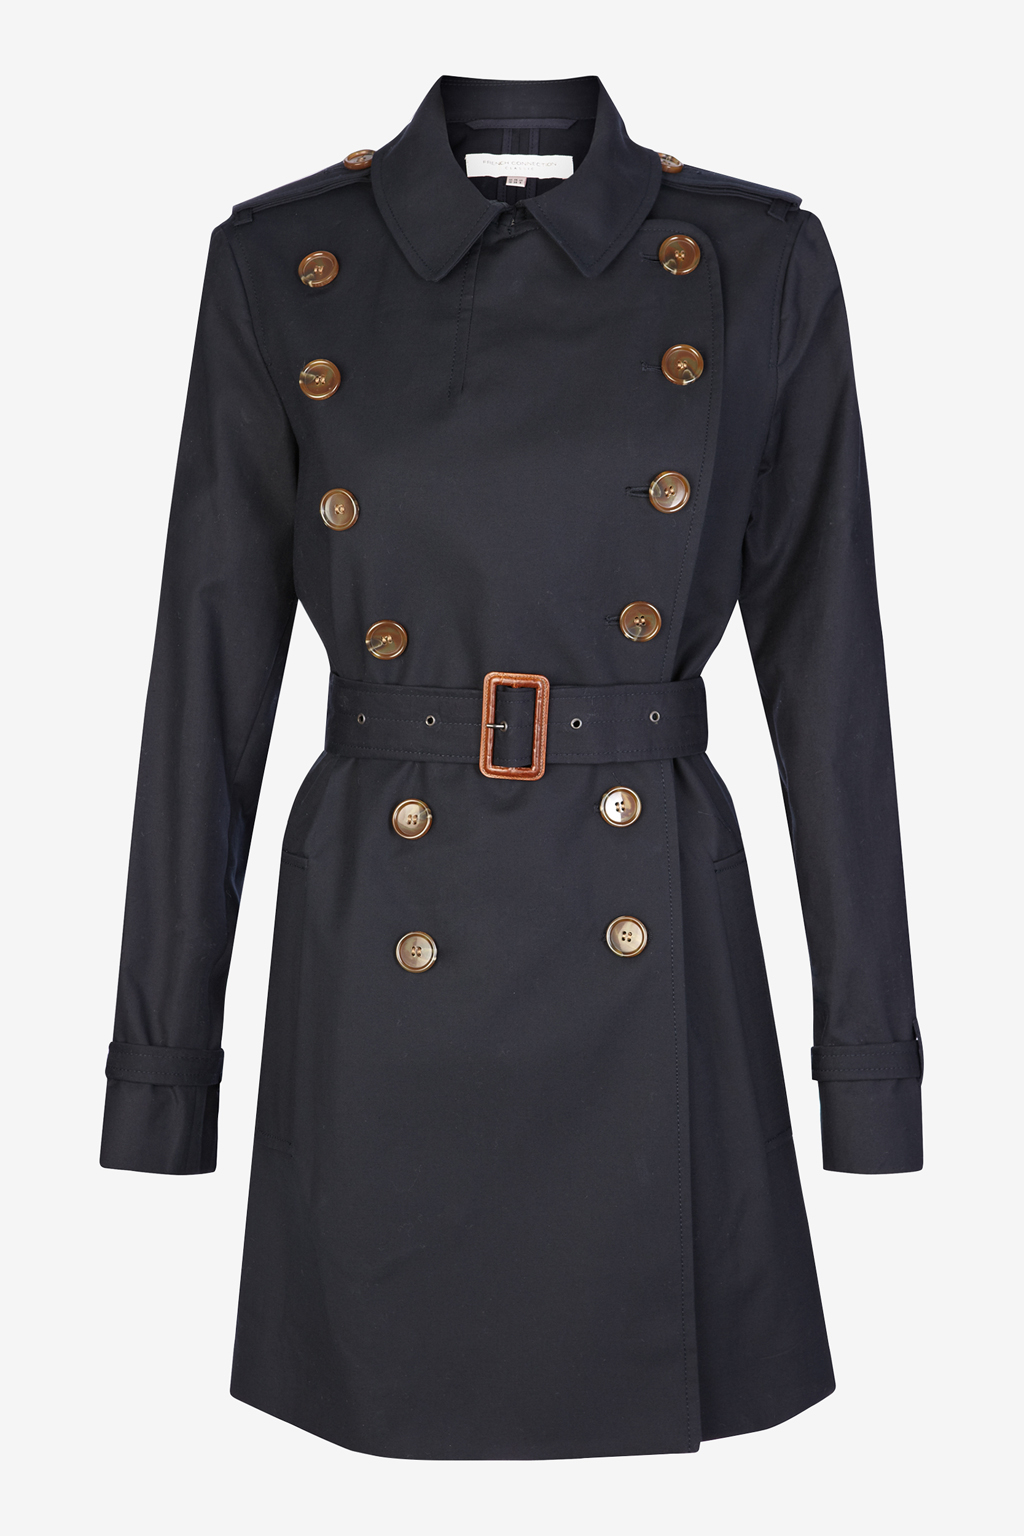 Lyst - French Connection Smart Catch Belted Trench Coat in Black